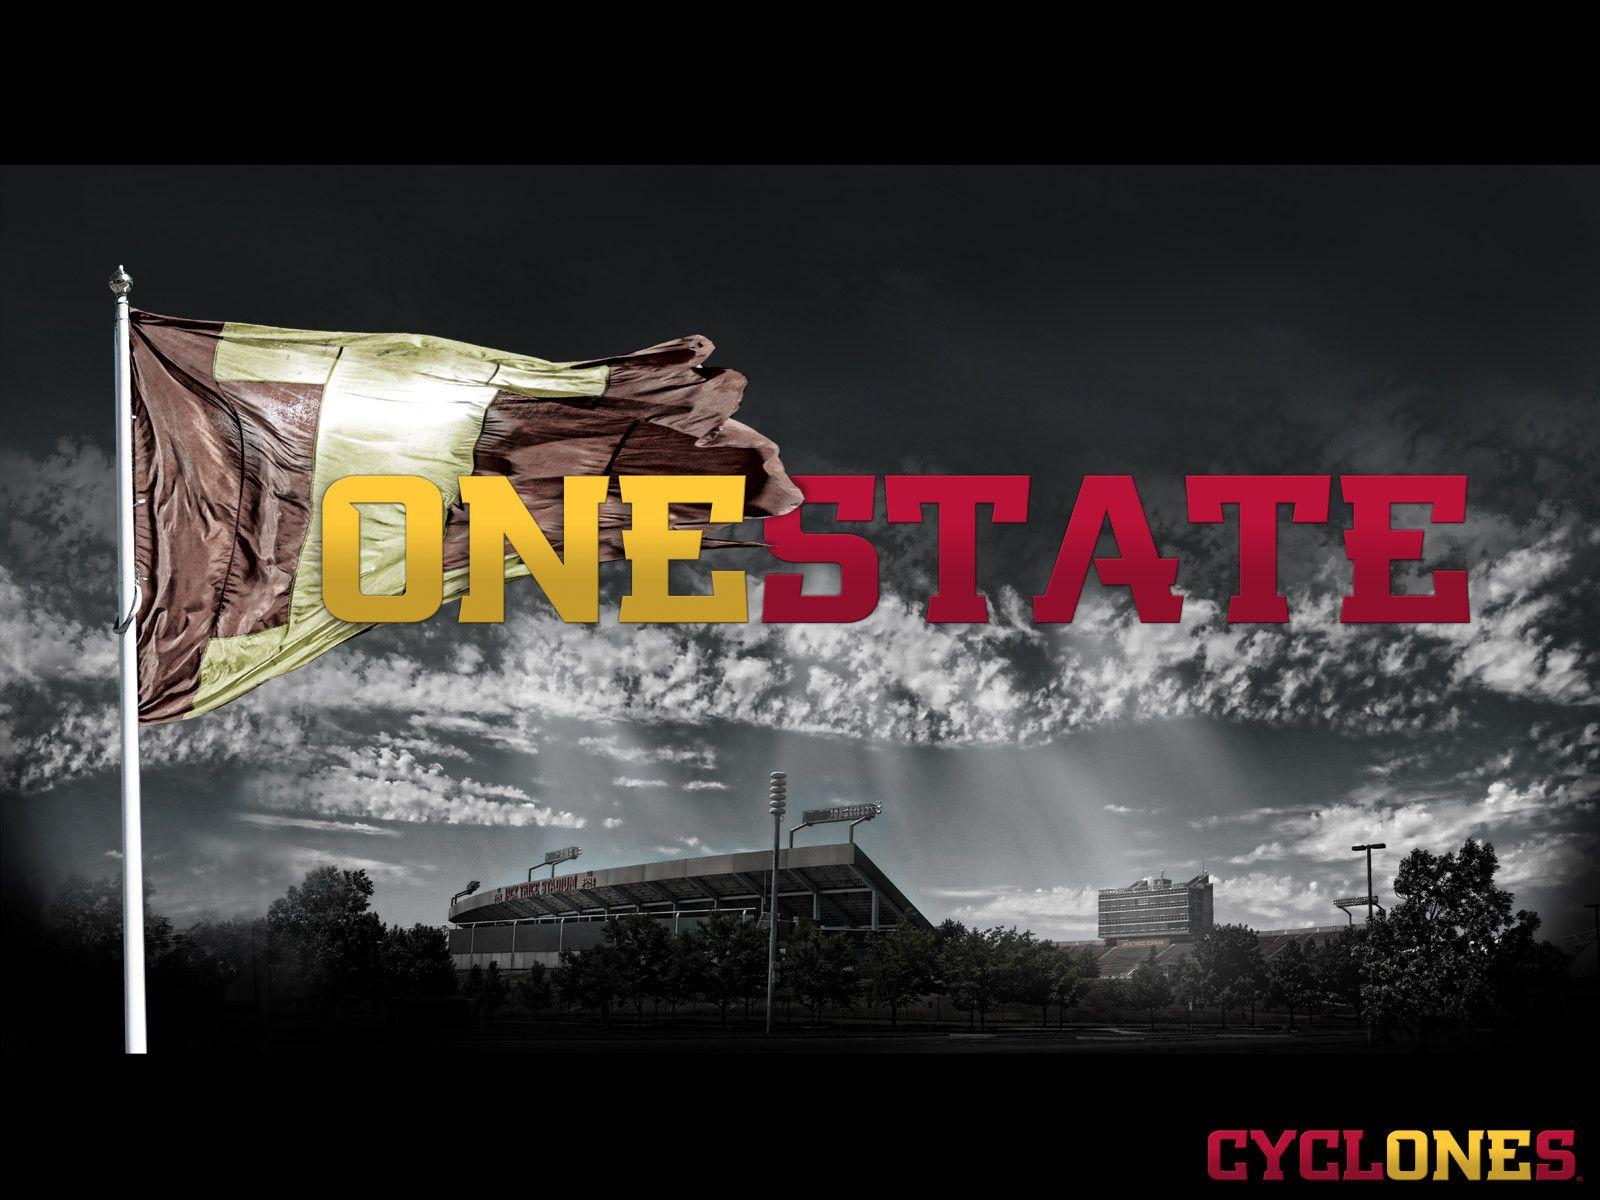 Iowa State Wallpapers - Wallpaper Cave